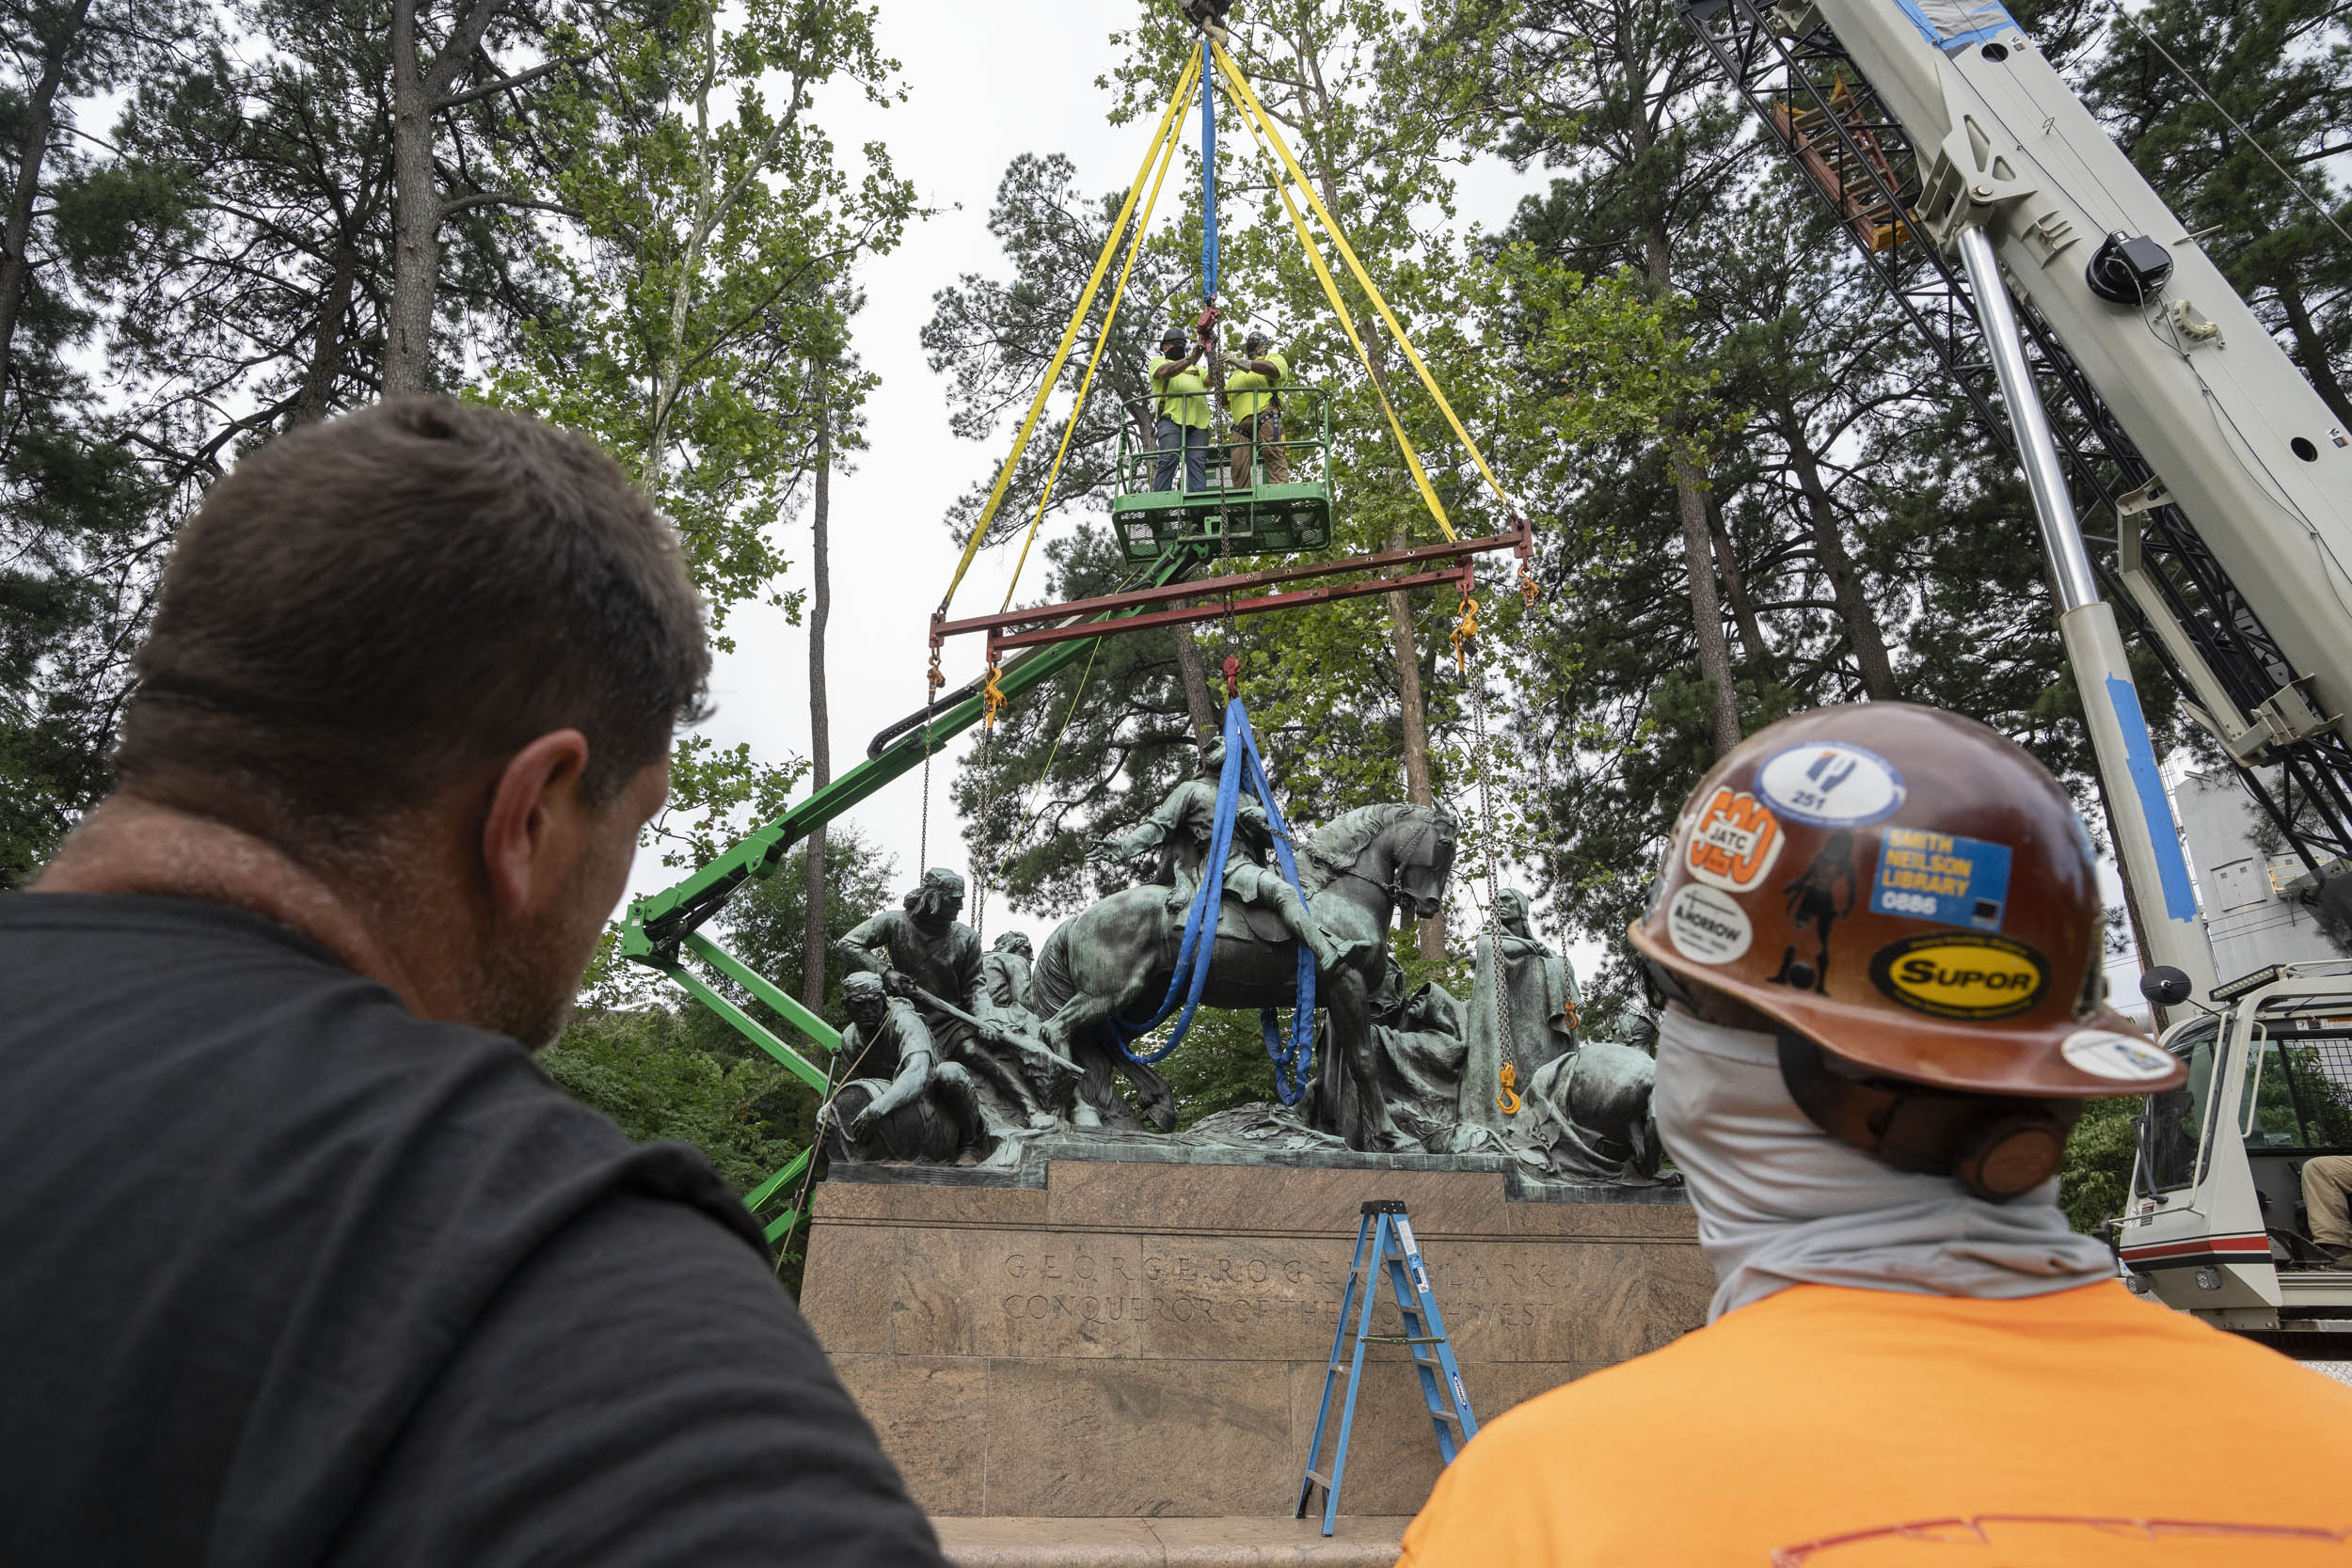 Construction workers watch at the clark statue gets removed